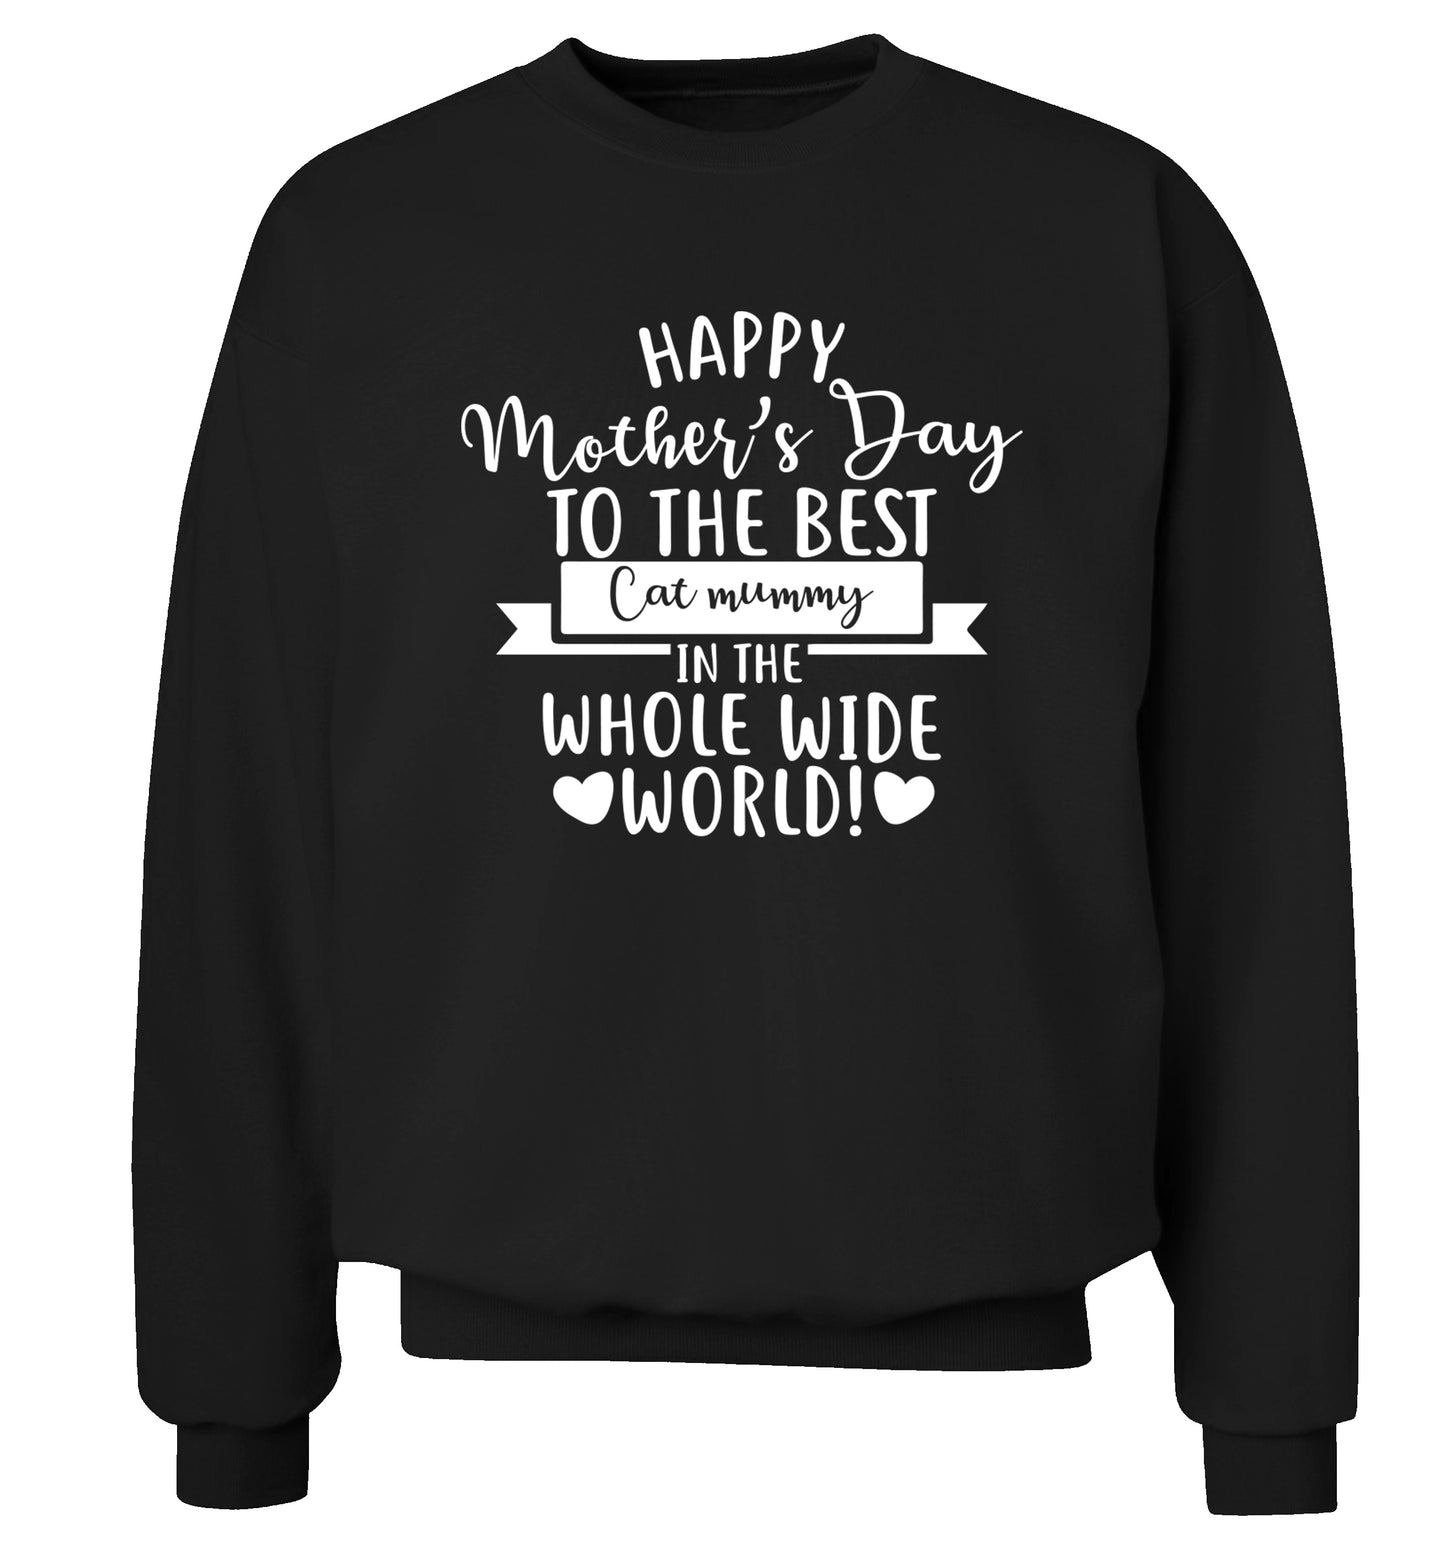 Happy mother's day to the best cat mummy in the world Adult's unisex black Sweater 2XL